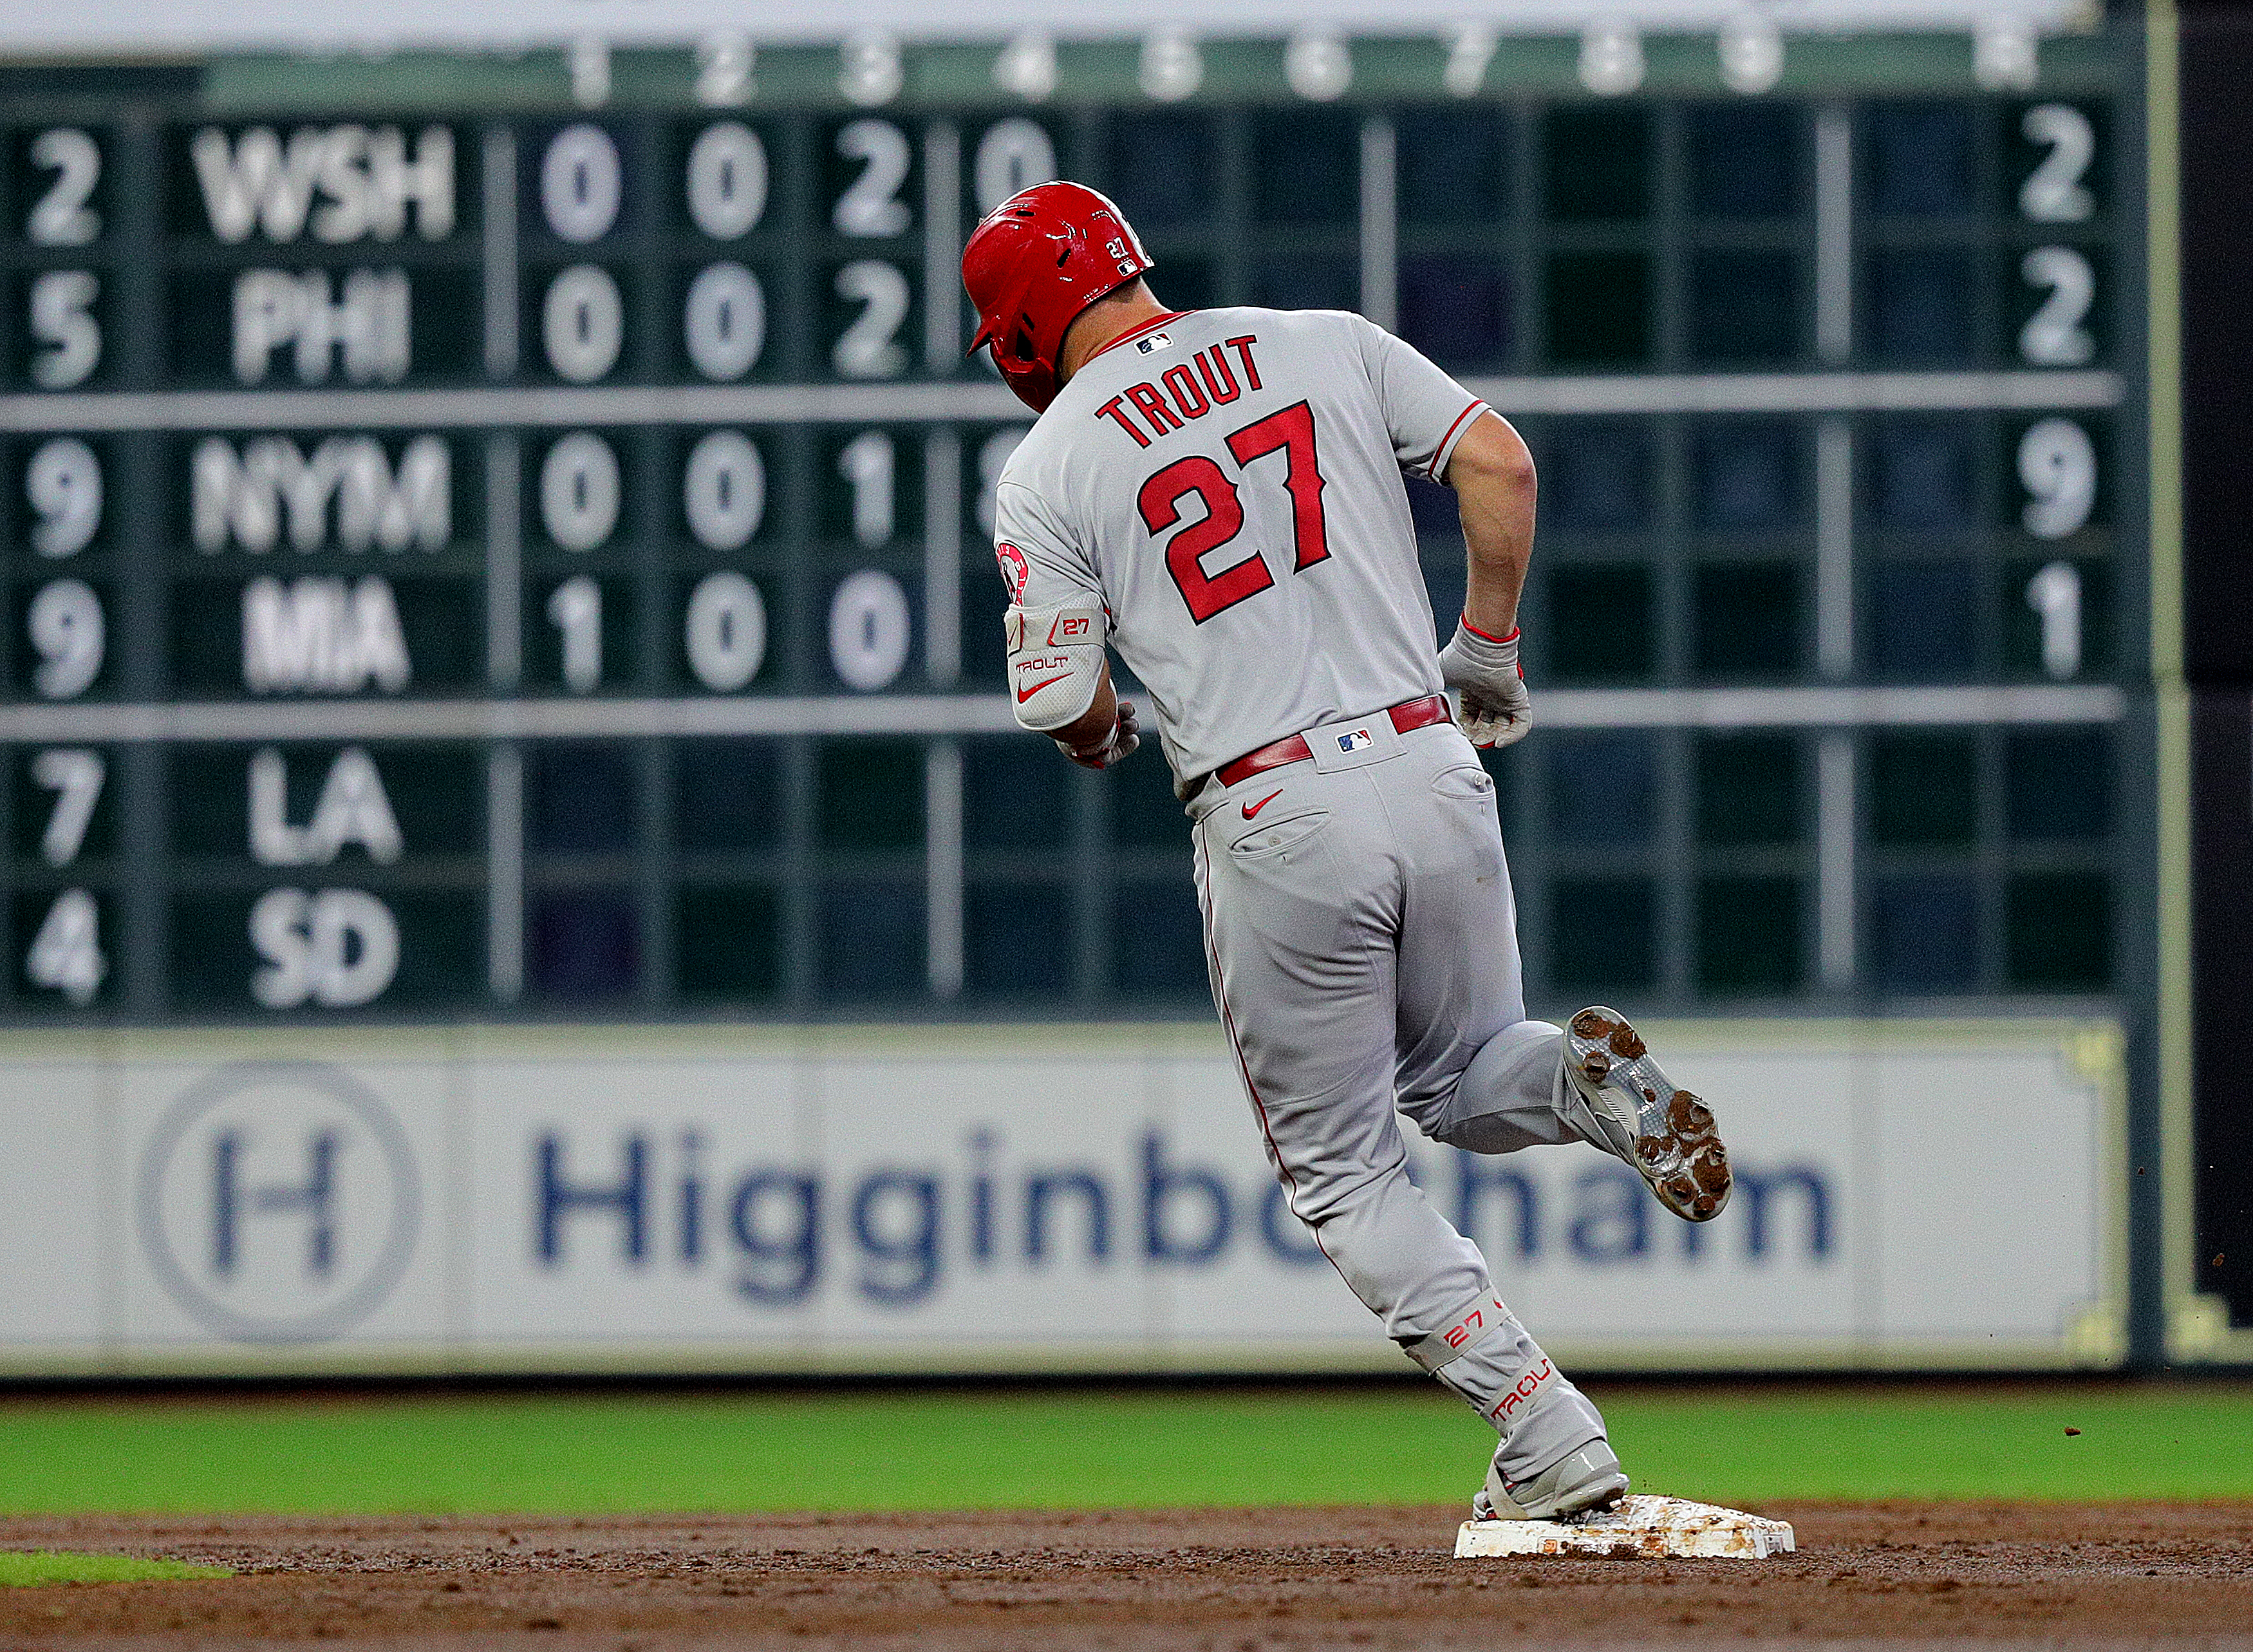 Who Is Mike Trout? Let's Know More About The American Baseball Player!